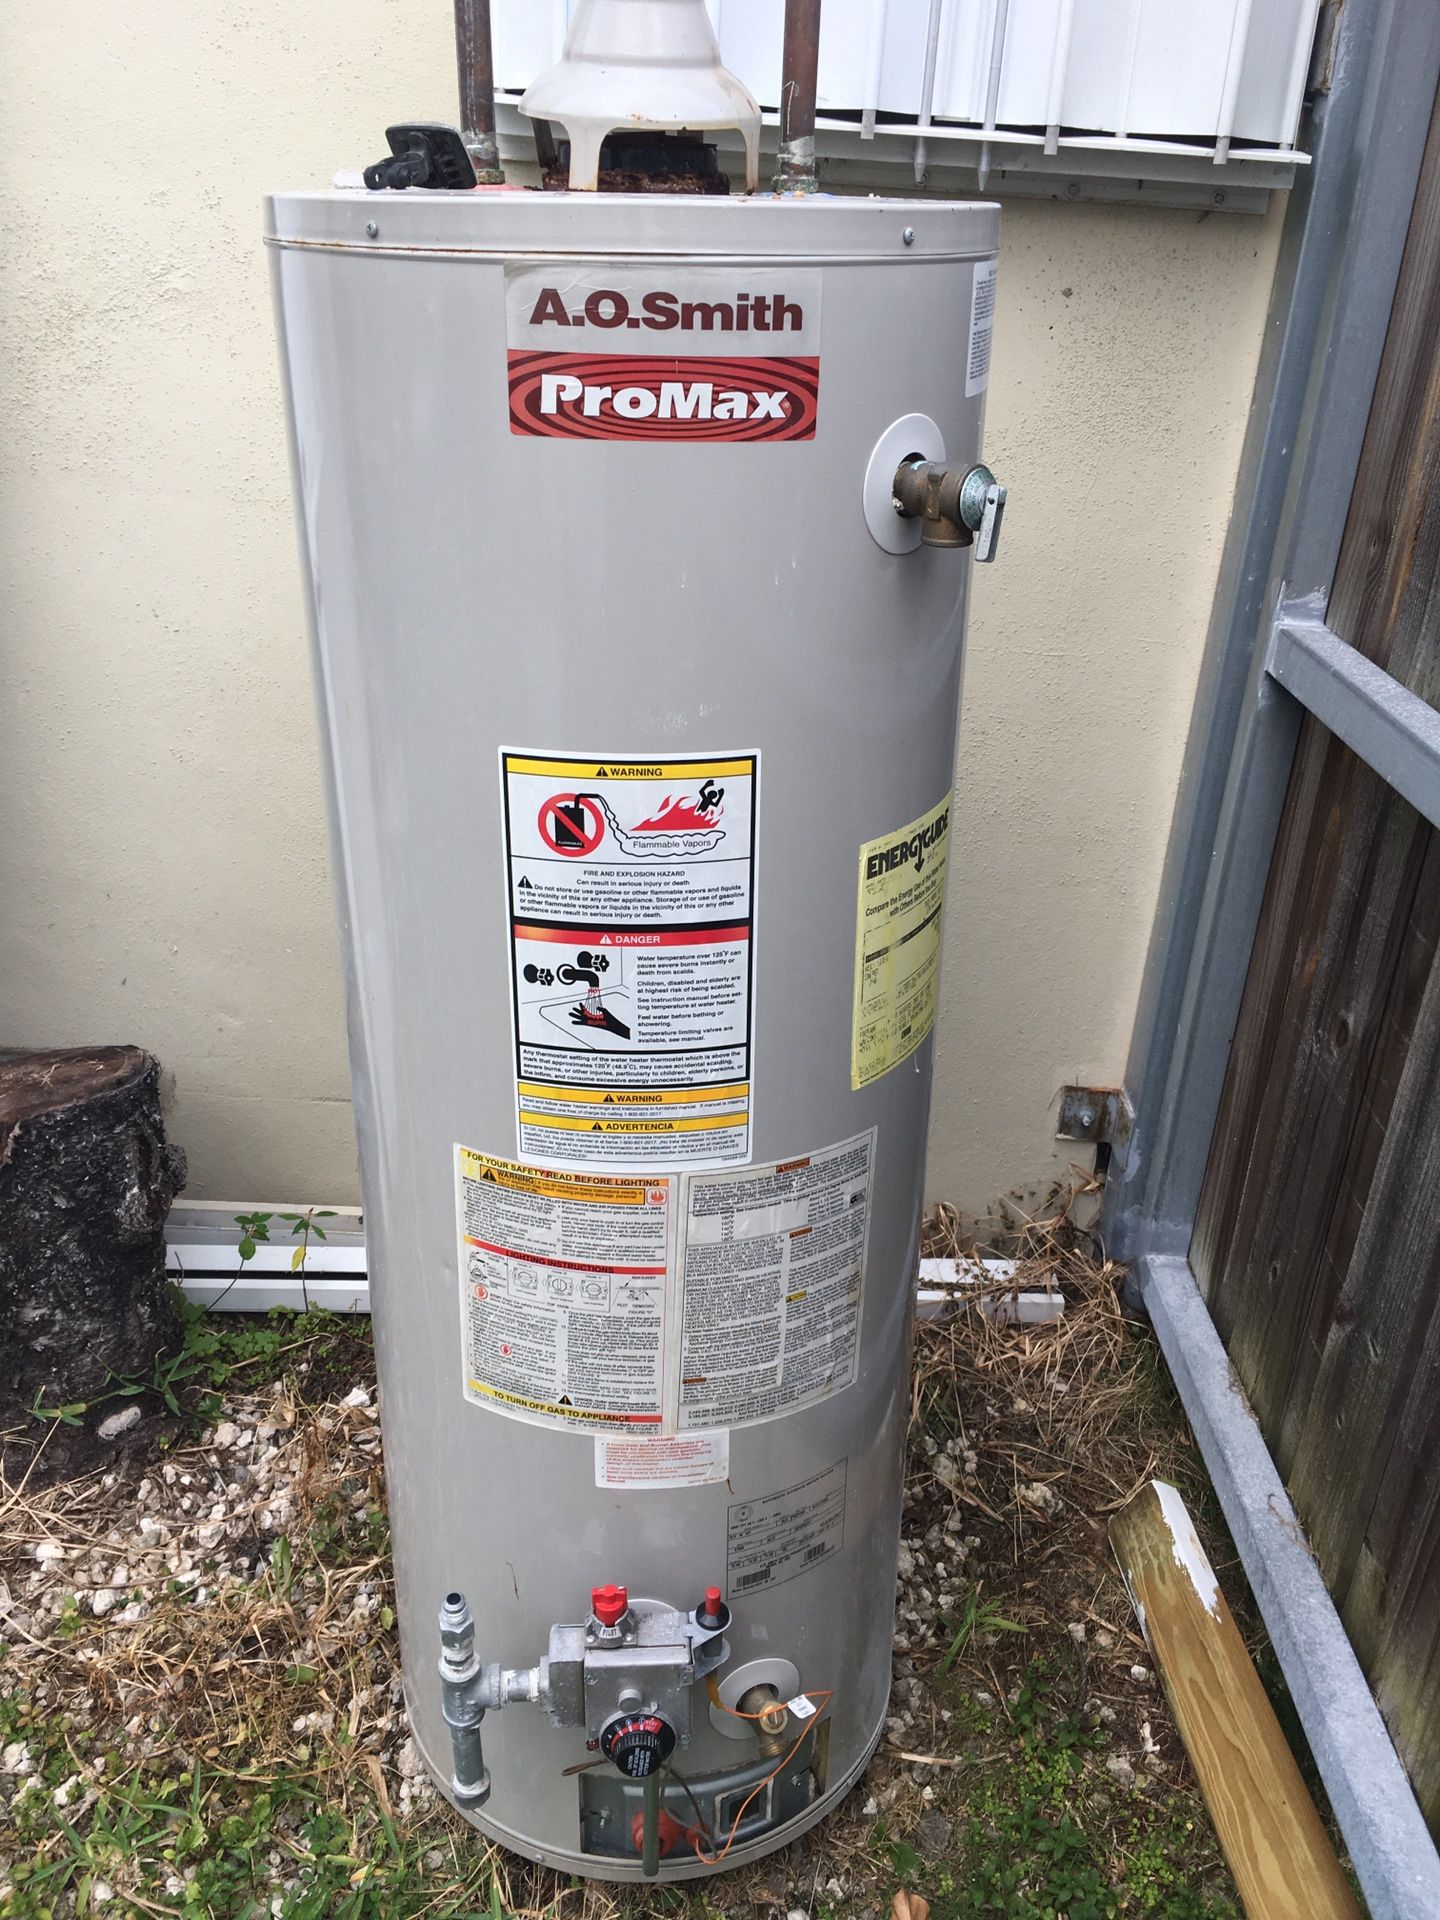 Hot water heater 40 gal. A.O. Smith ProMax gas